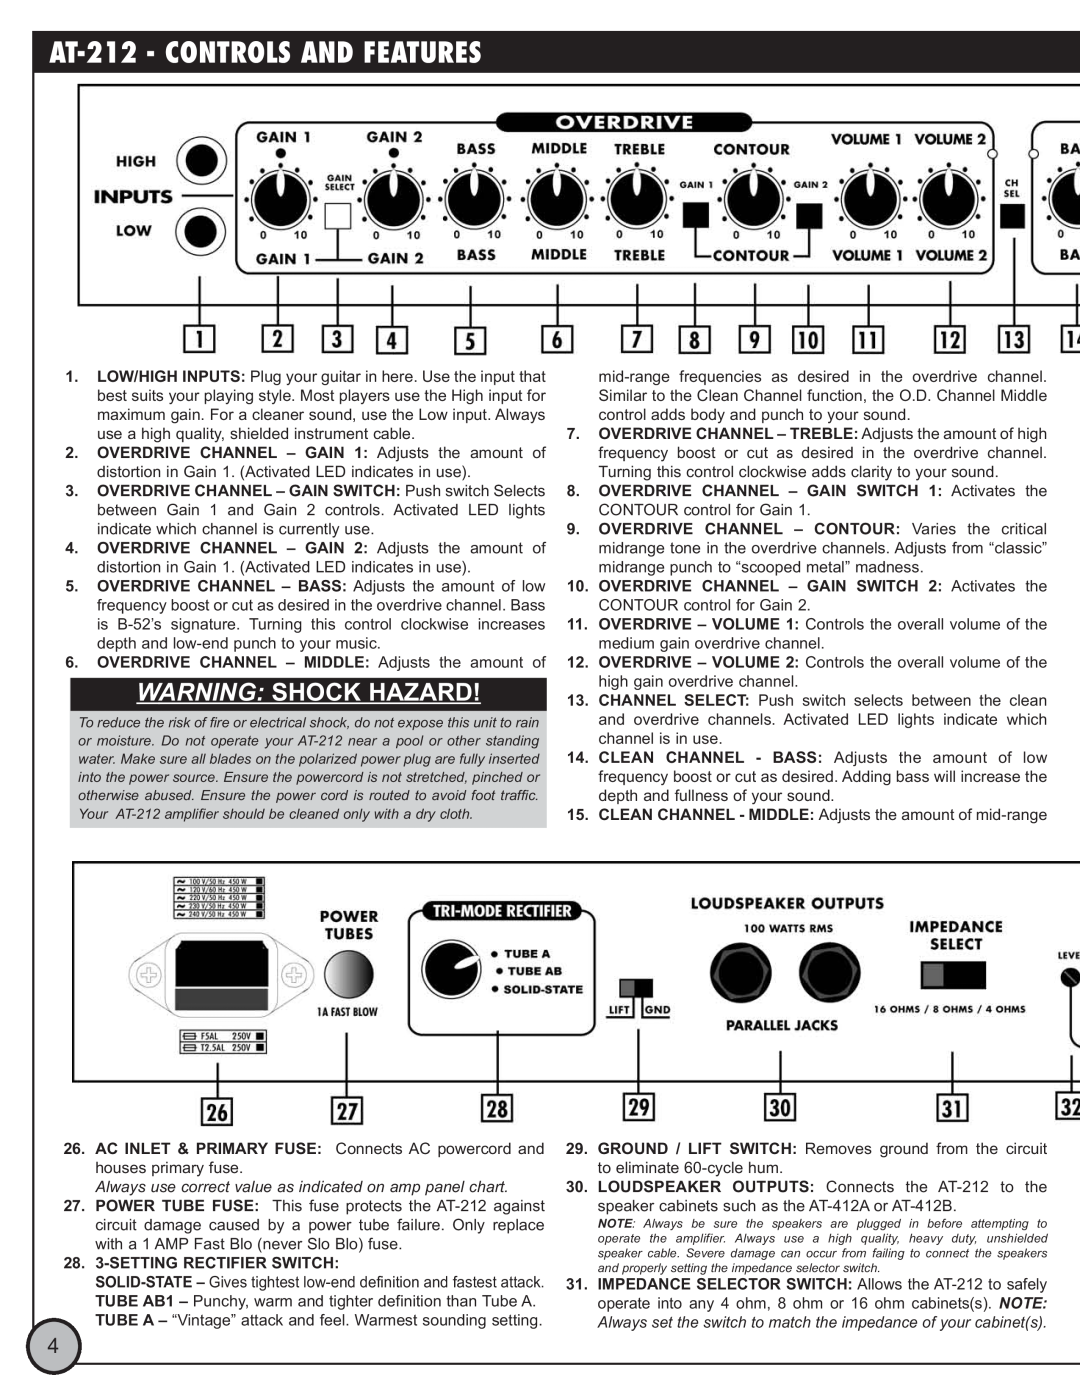 ETI Sound Systems, INC manual Warning: Shock Hazard, AT-212- CONTROLS AND FEATURES 